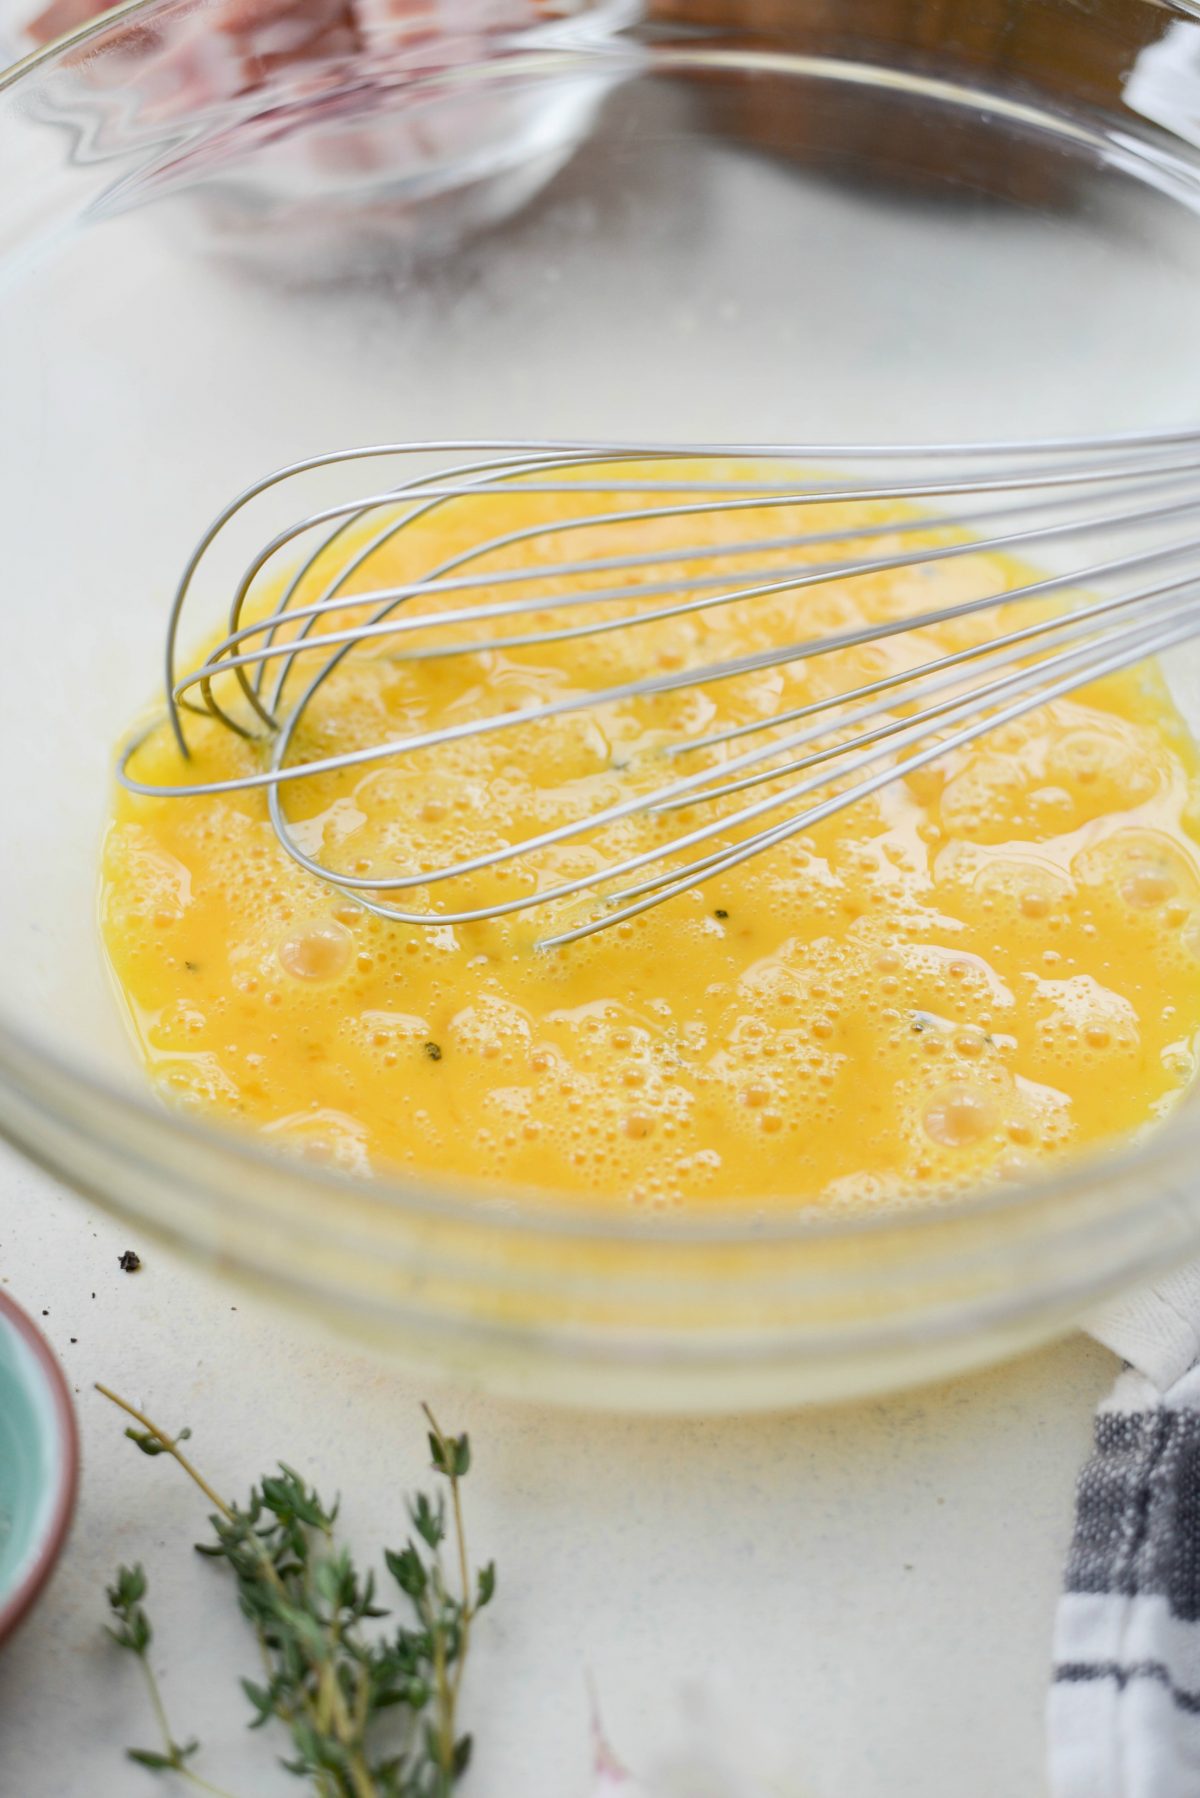 whisk and beat the eggs.